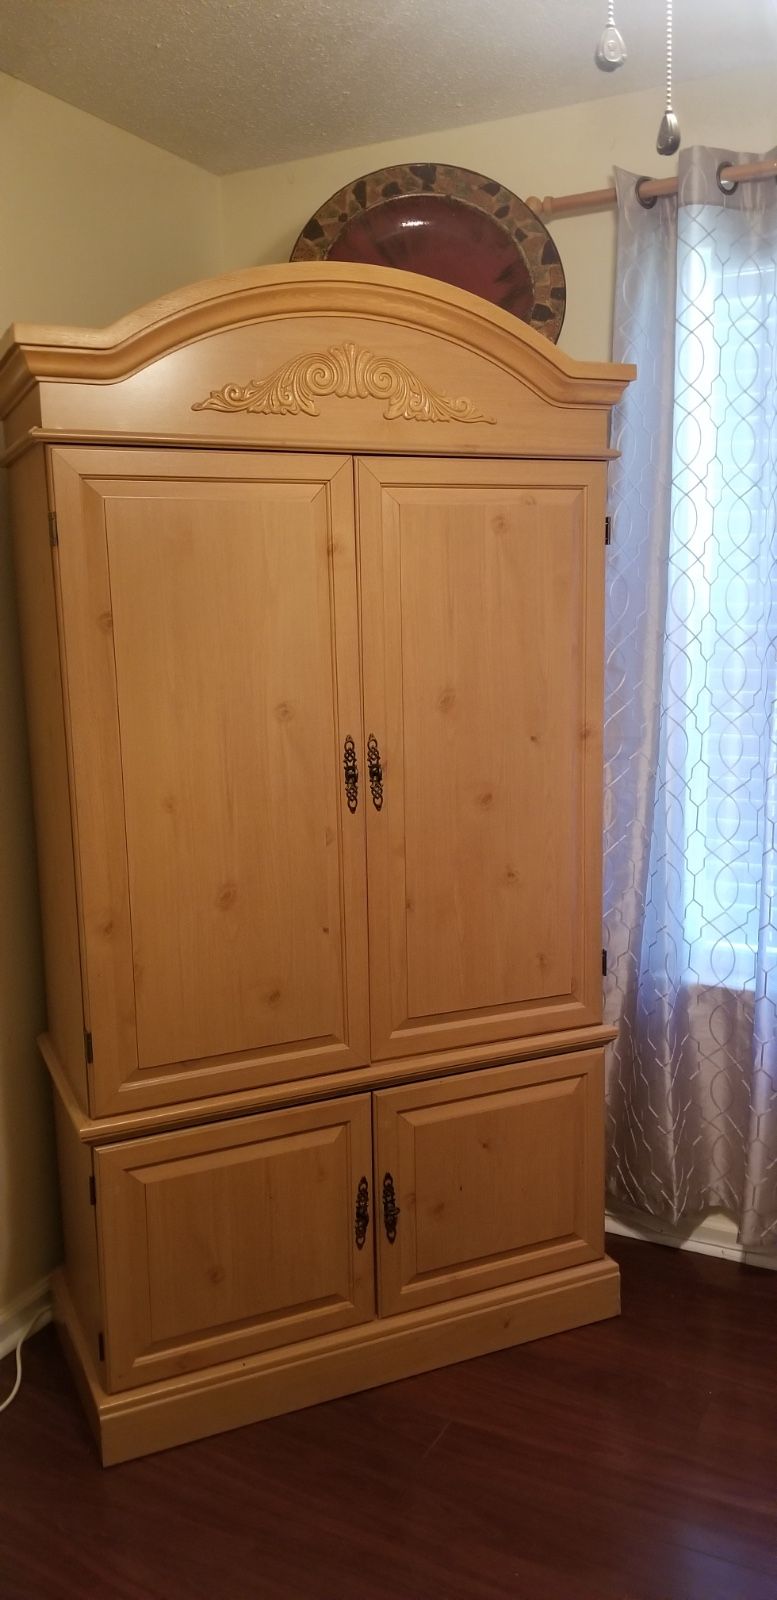 Extremely sturdy & durable armoire